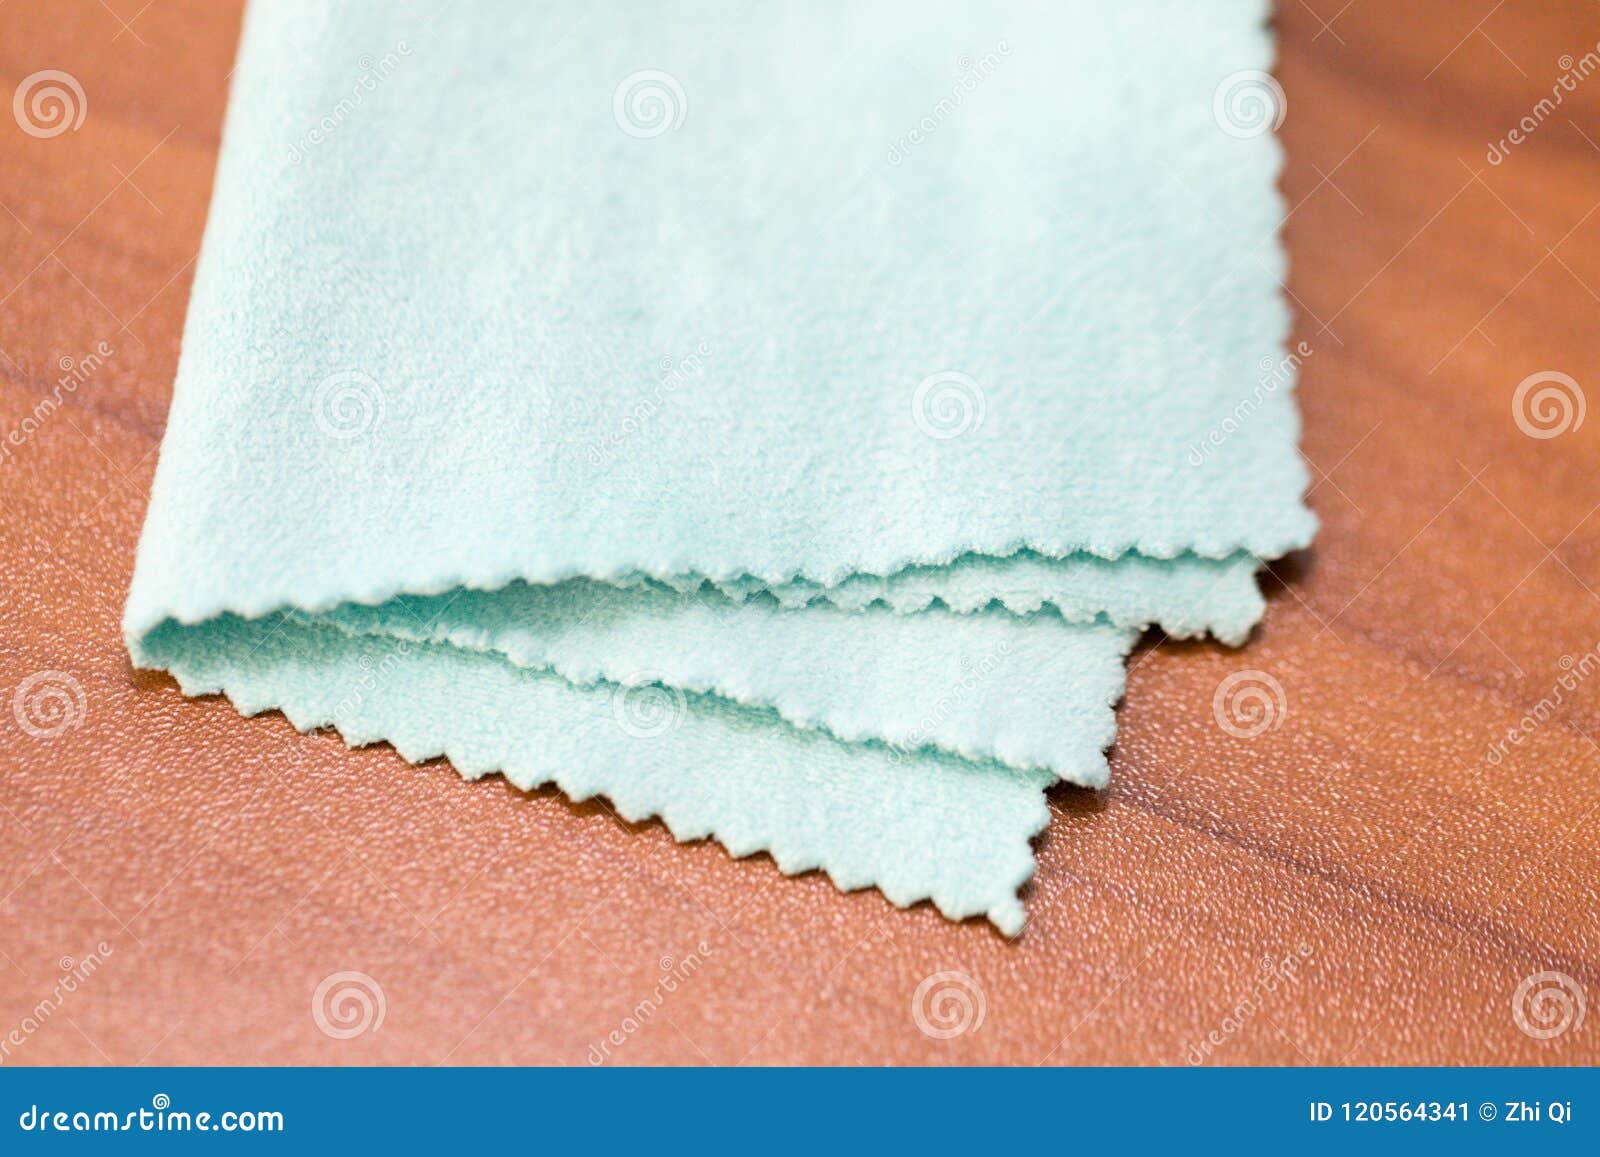 Cloth for cleaning glasses stock image. Image of background